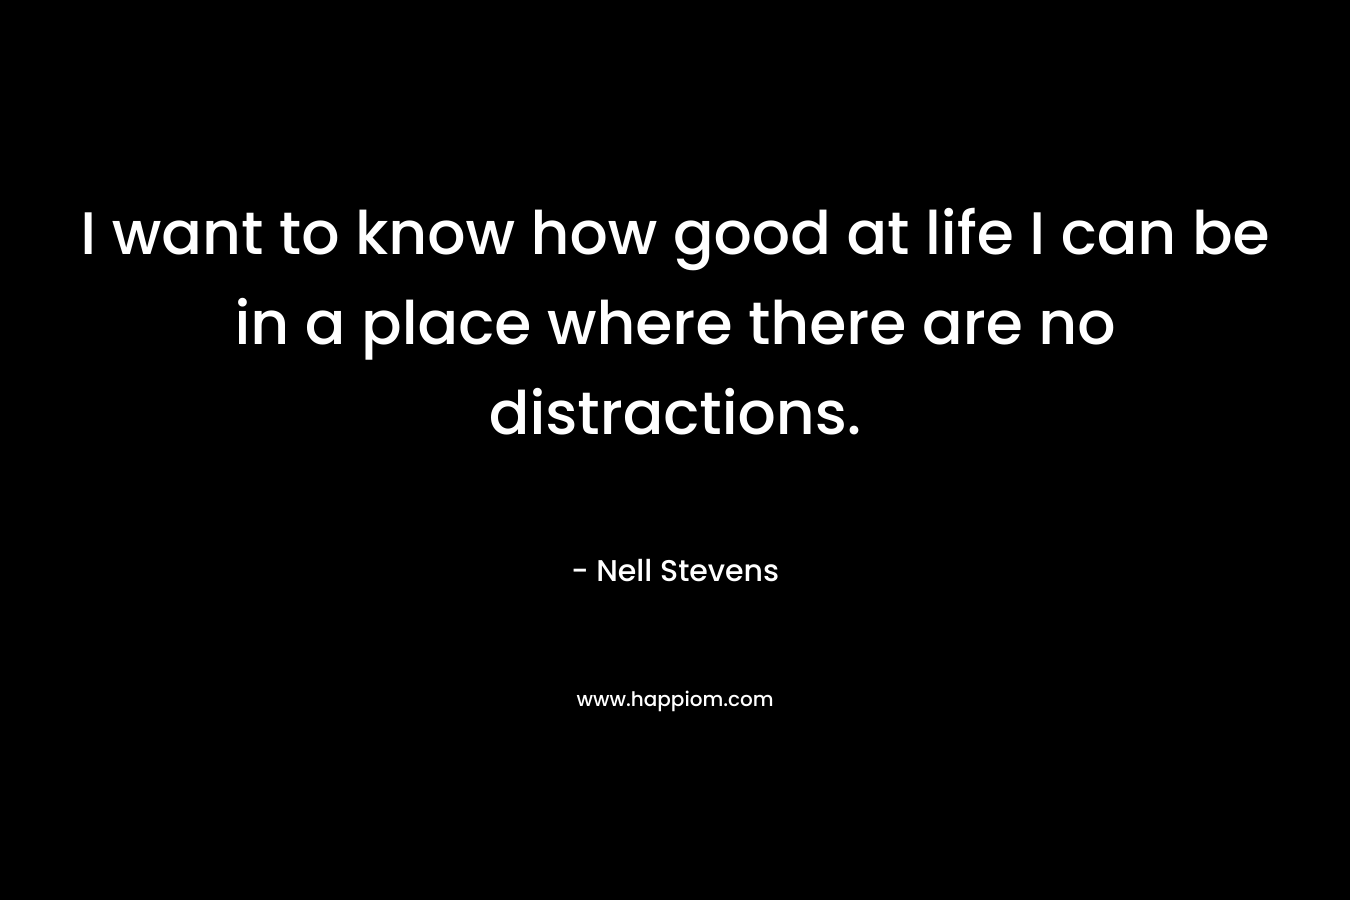 I want to know how good at life I can be in a place where there are no distractions. – Nell Stevens